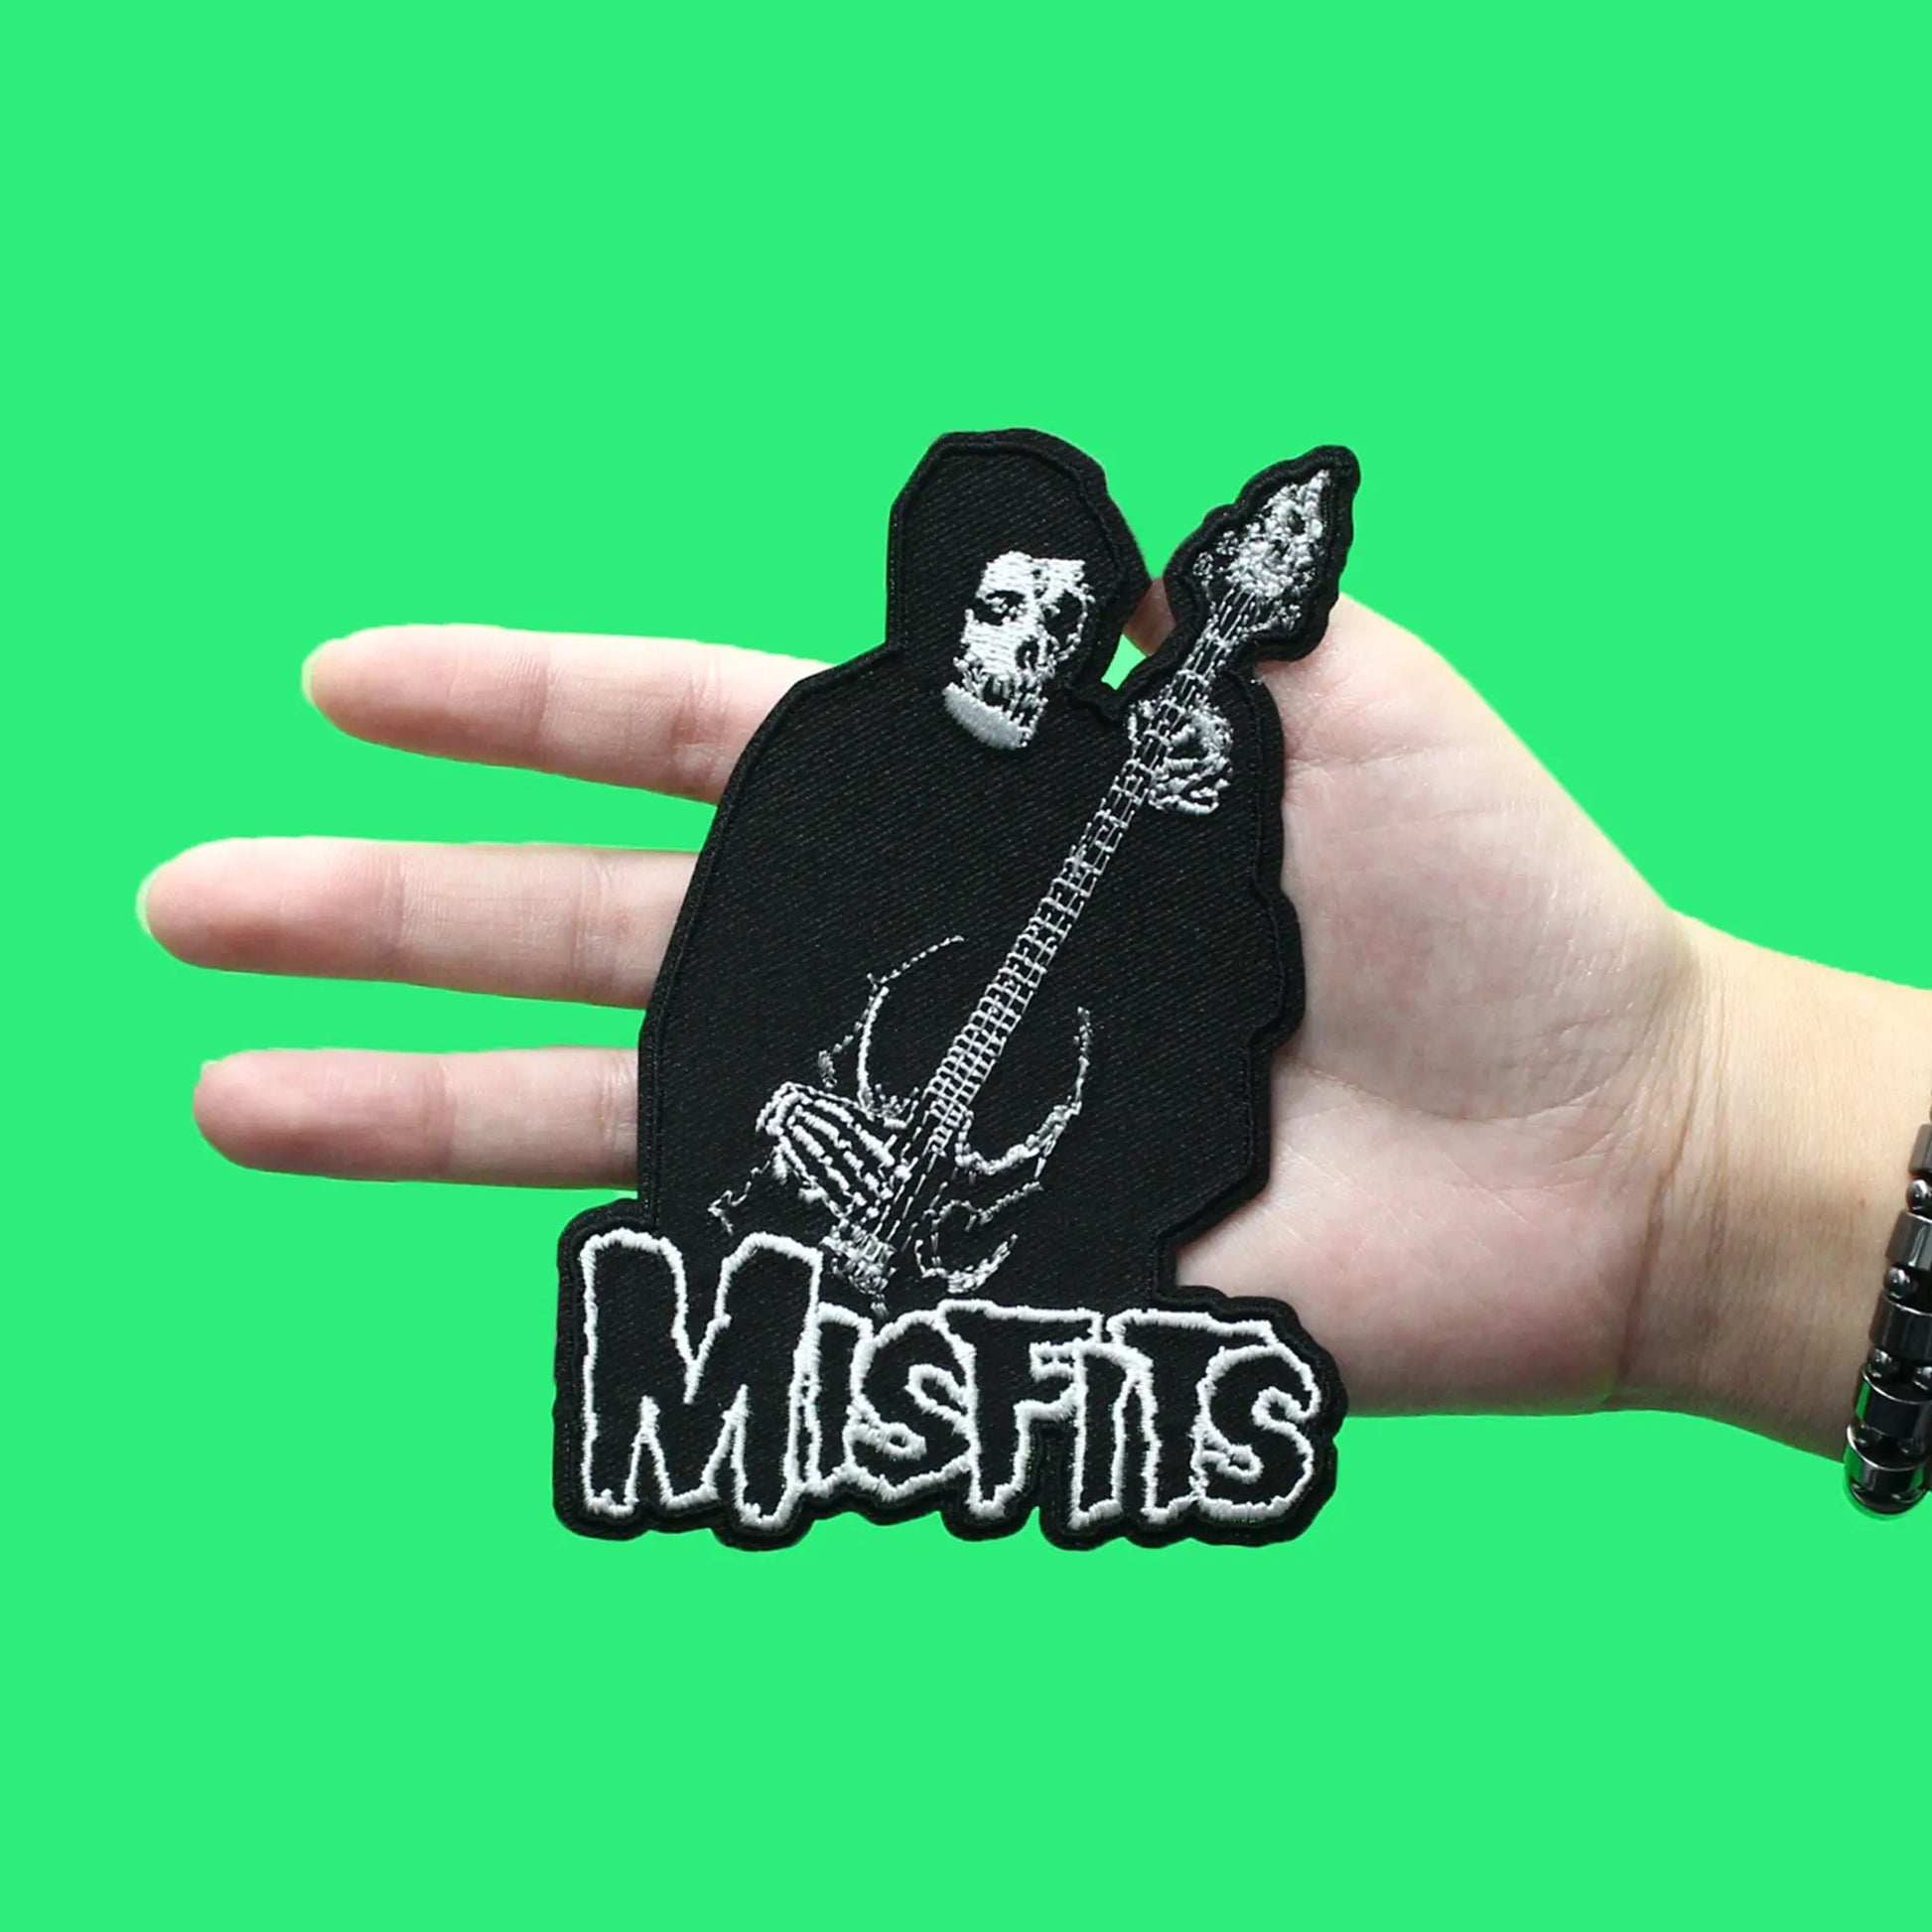 The Misfits Bullet Artwork Patch Band Punk Rock Fan Embroidered Iron O –  Your Patch Store